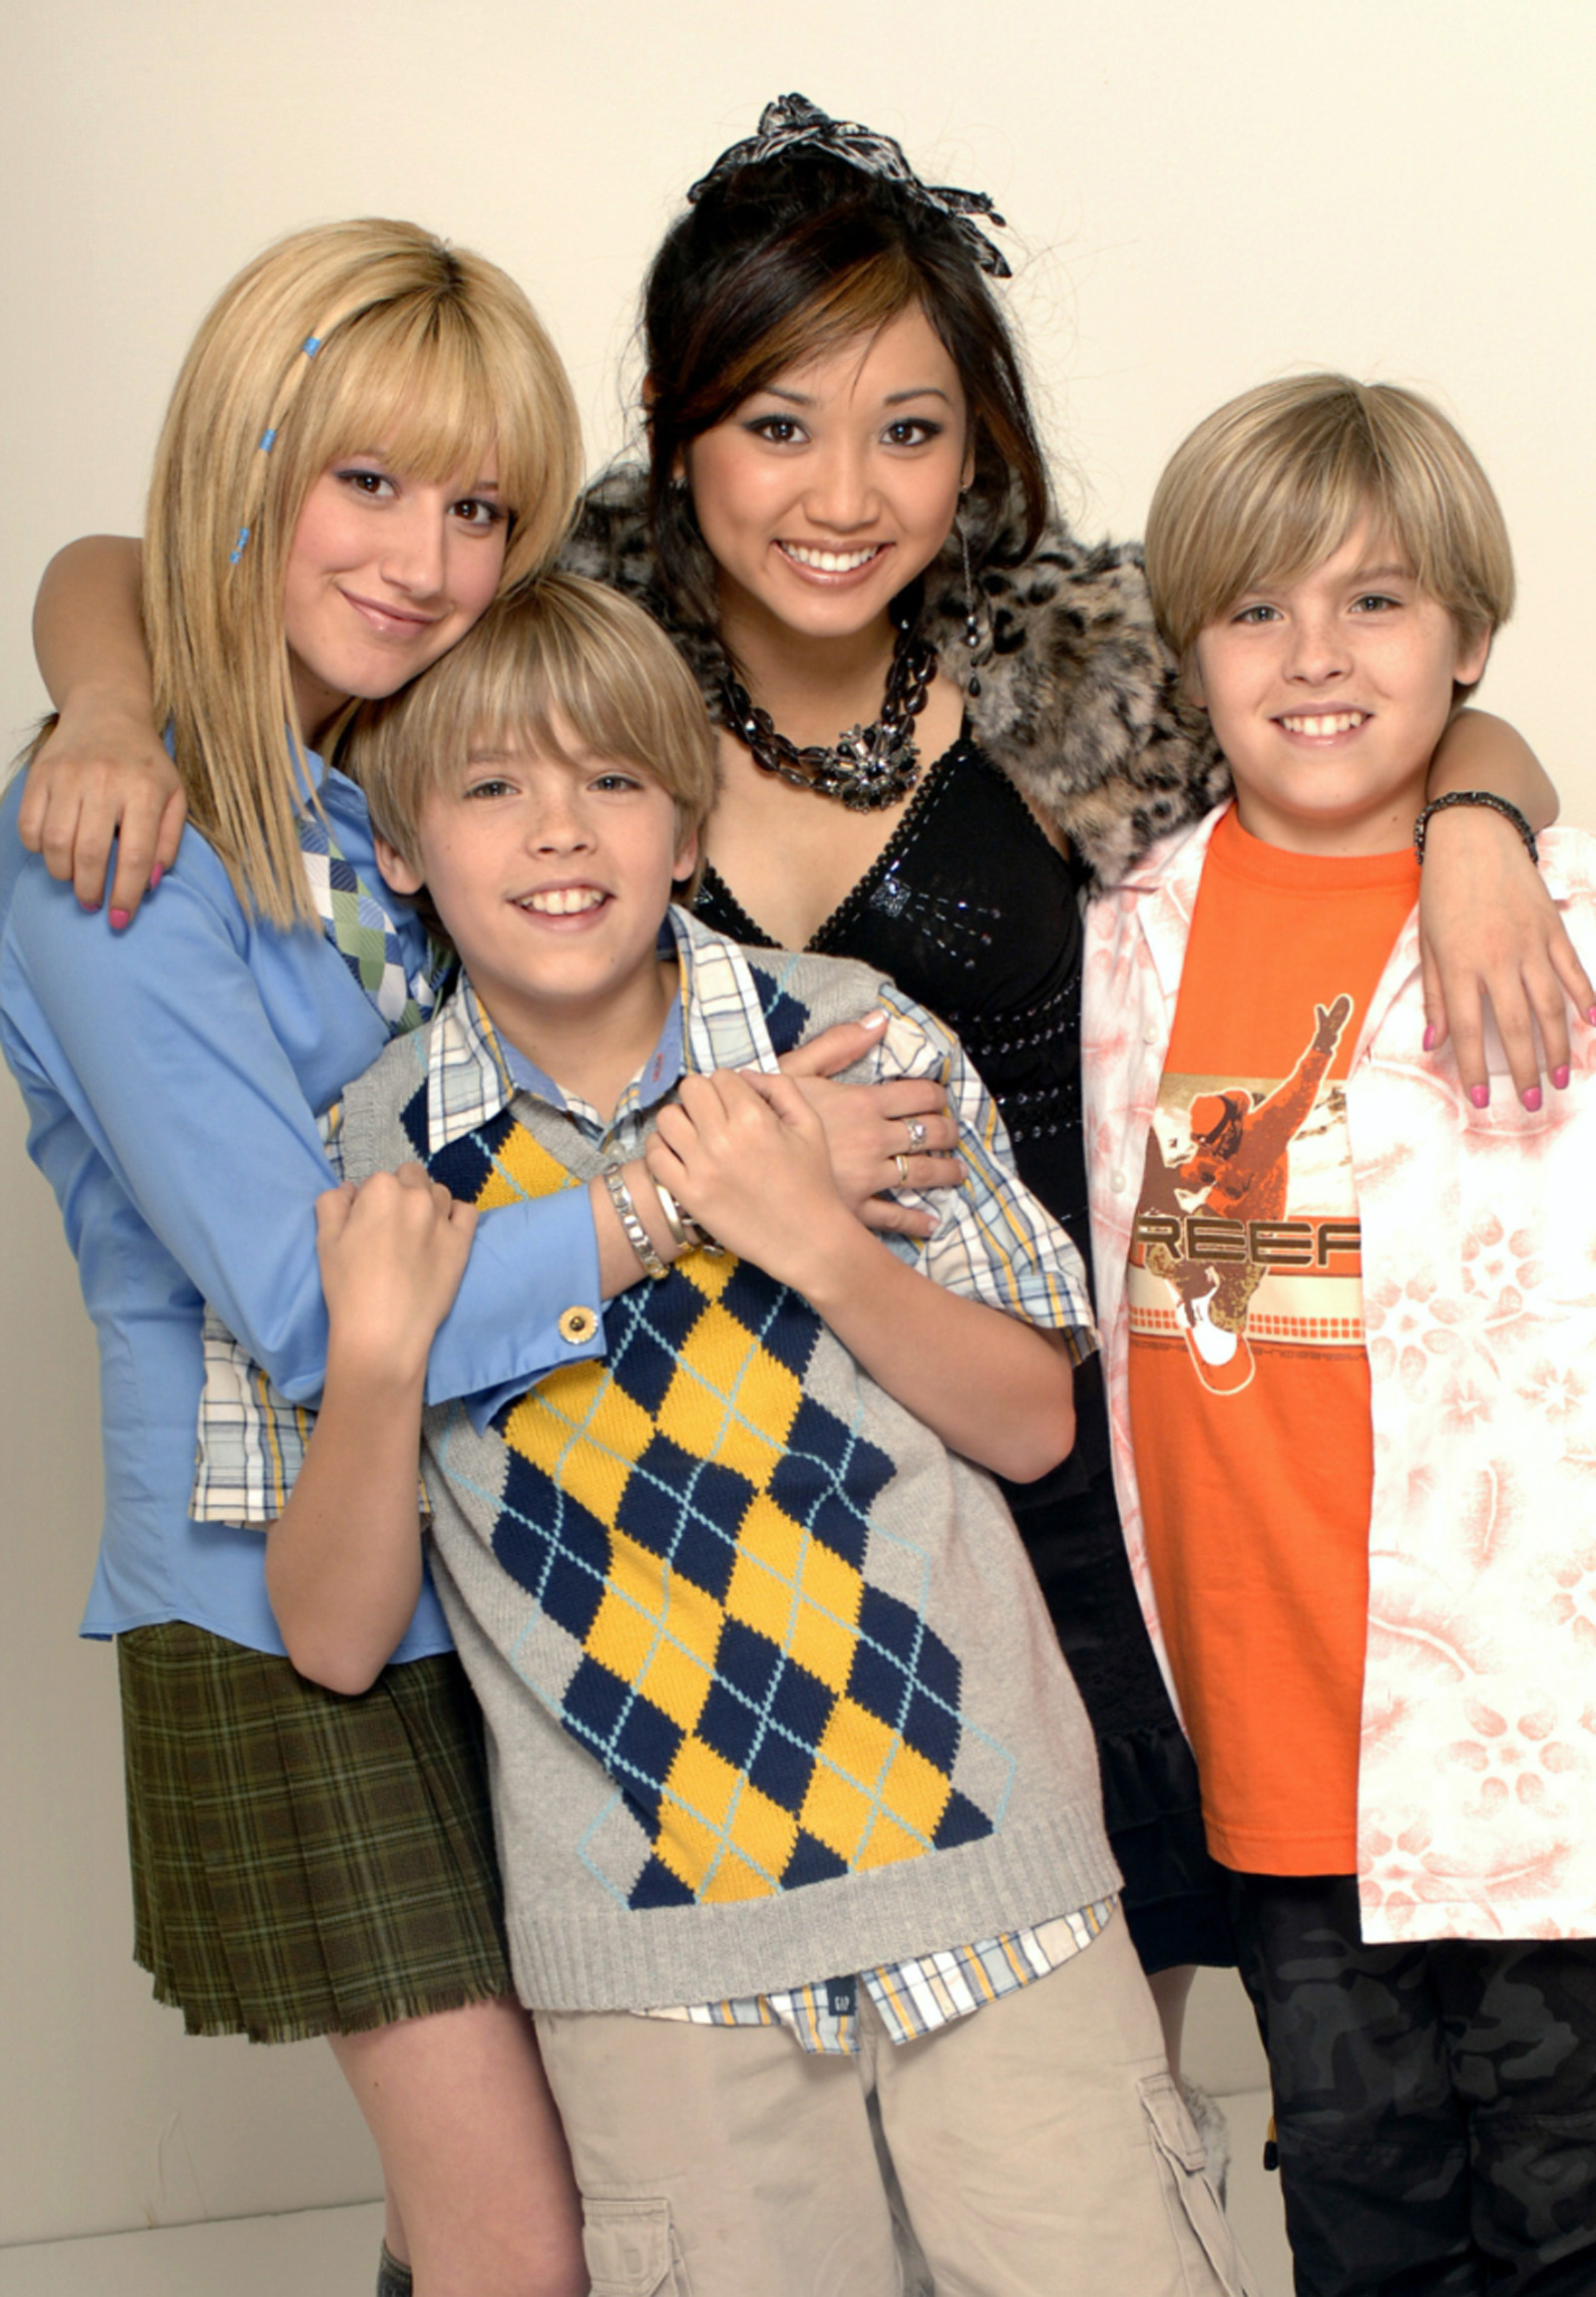 Ashley Tisdale in The Suite Life of Zack and Cody (Season 1)